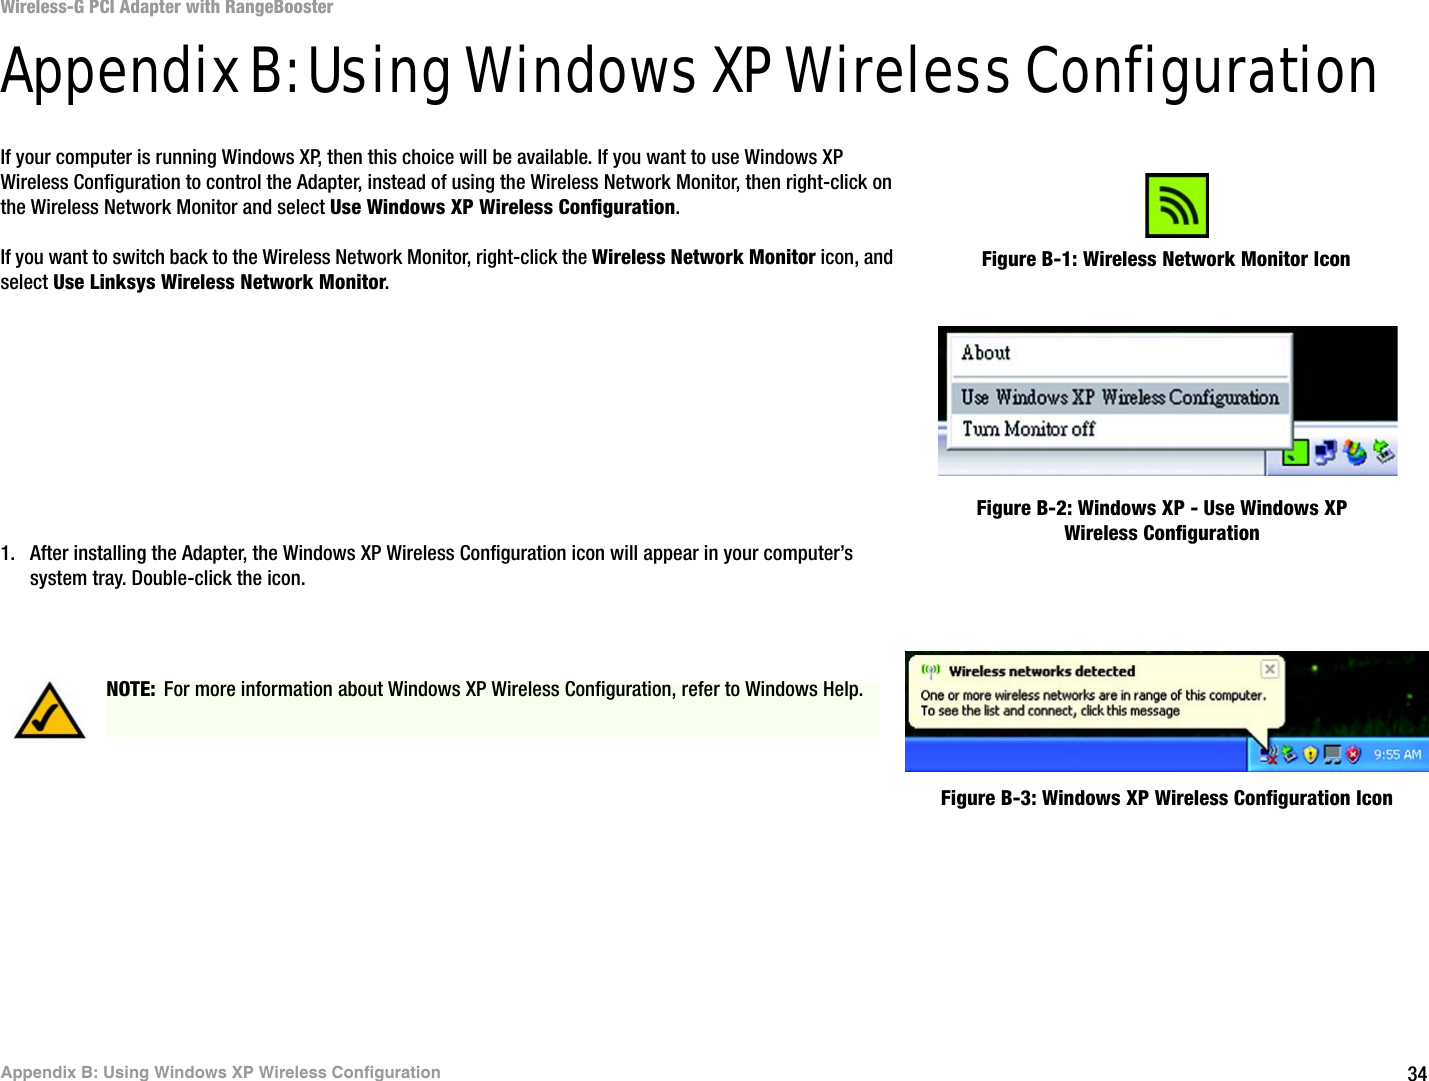 34Appendix B: Using Windows XP Wireless ConfigurationWireless-G PCI Adapter with RangeBoosterAppendix B: Using Windows XP Wireless ConfigurationIf your computer is running Windows XP, then this choice will be available. If you want to use Windows XP Wireless Configuration to control the Adapter, instead of using the Wireless Network Monitor, then right-click on the Wireless Network Monitor and select Use Windows XP Wireless Configuration. If you want to switch back to the Wireless Network Monitor, right-click the Wireless Network Monitor icon, and select Use Linksys Wireless Network Monitor.1. After installing the Adapter, the Windows XP Wireless Configuration icon will appear in your computer’s system tray. Double-click the icon. Figure B-1: Wireless Network Monitor IconFigure B-2: Windows XP - Use Windows XP Wireless ConfigurationNOTE: For more information about Windows XP Wireless Configuration, refer to Windows Help.Figure B-3: Windows XP Wireless Configuration Icon